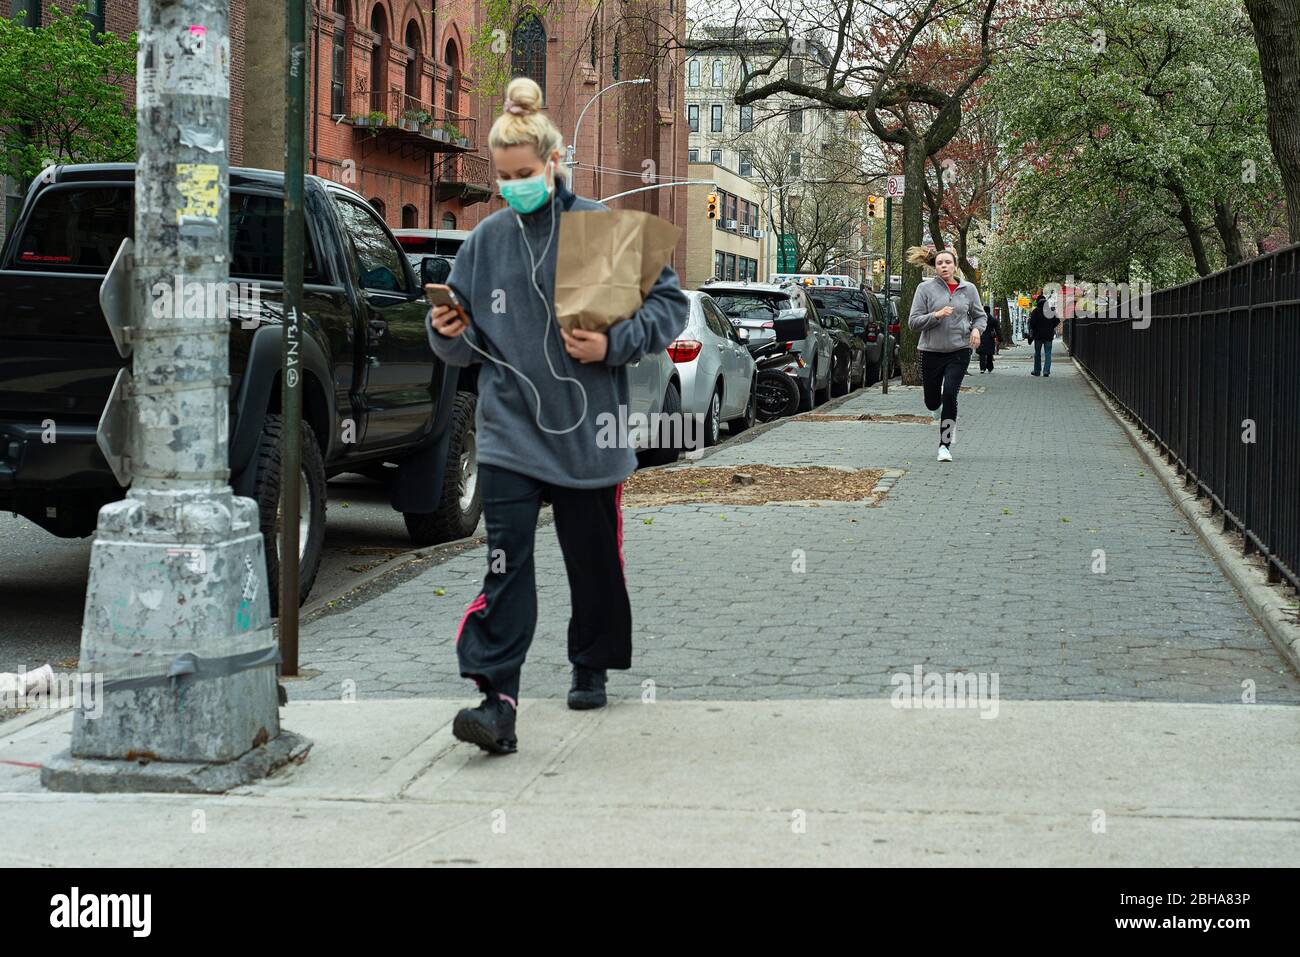 A runner approaching a pedestrian from behind in April 2020 during the COVID 19 pandemic in New York City. Stock Photo